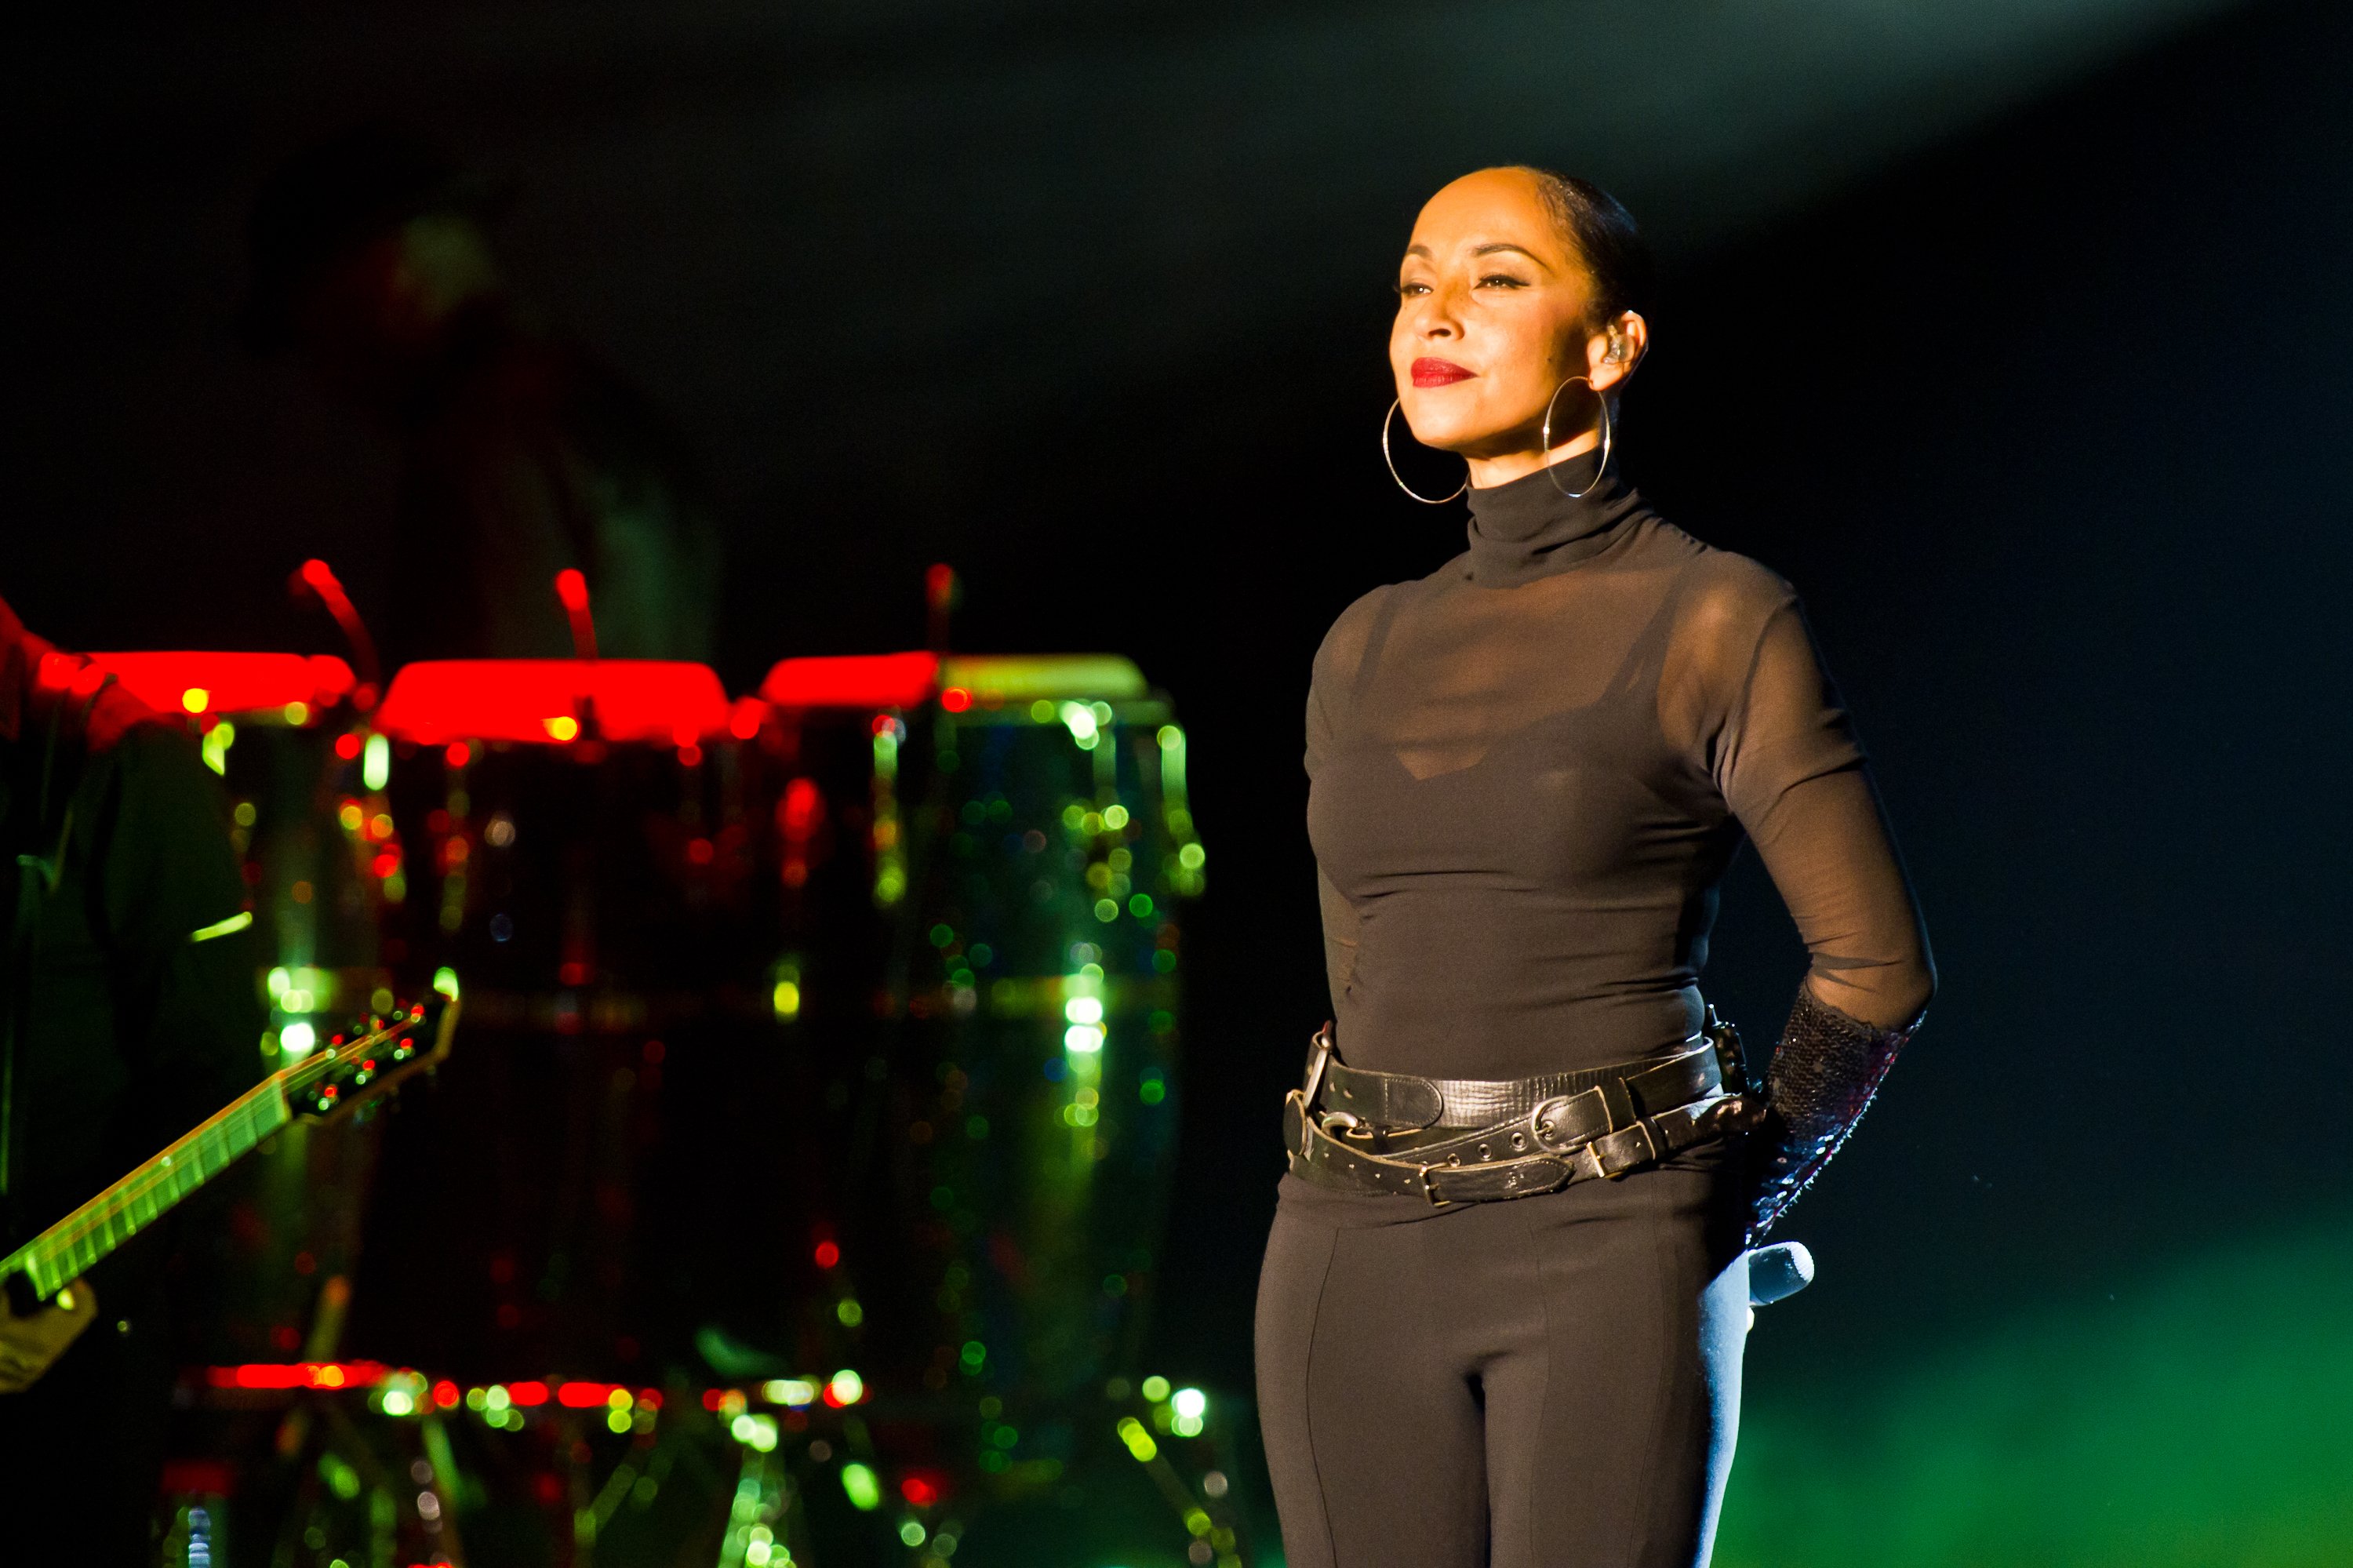 Sade performs at Palais Omnisports de Bercy on May 17, 2011 in Paris, France | Source: Getty Images